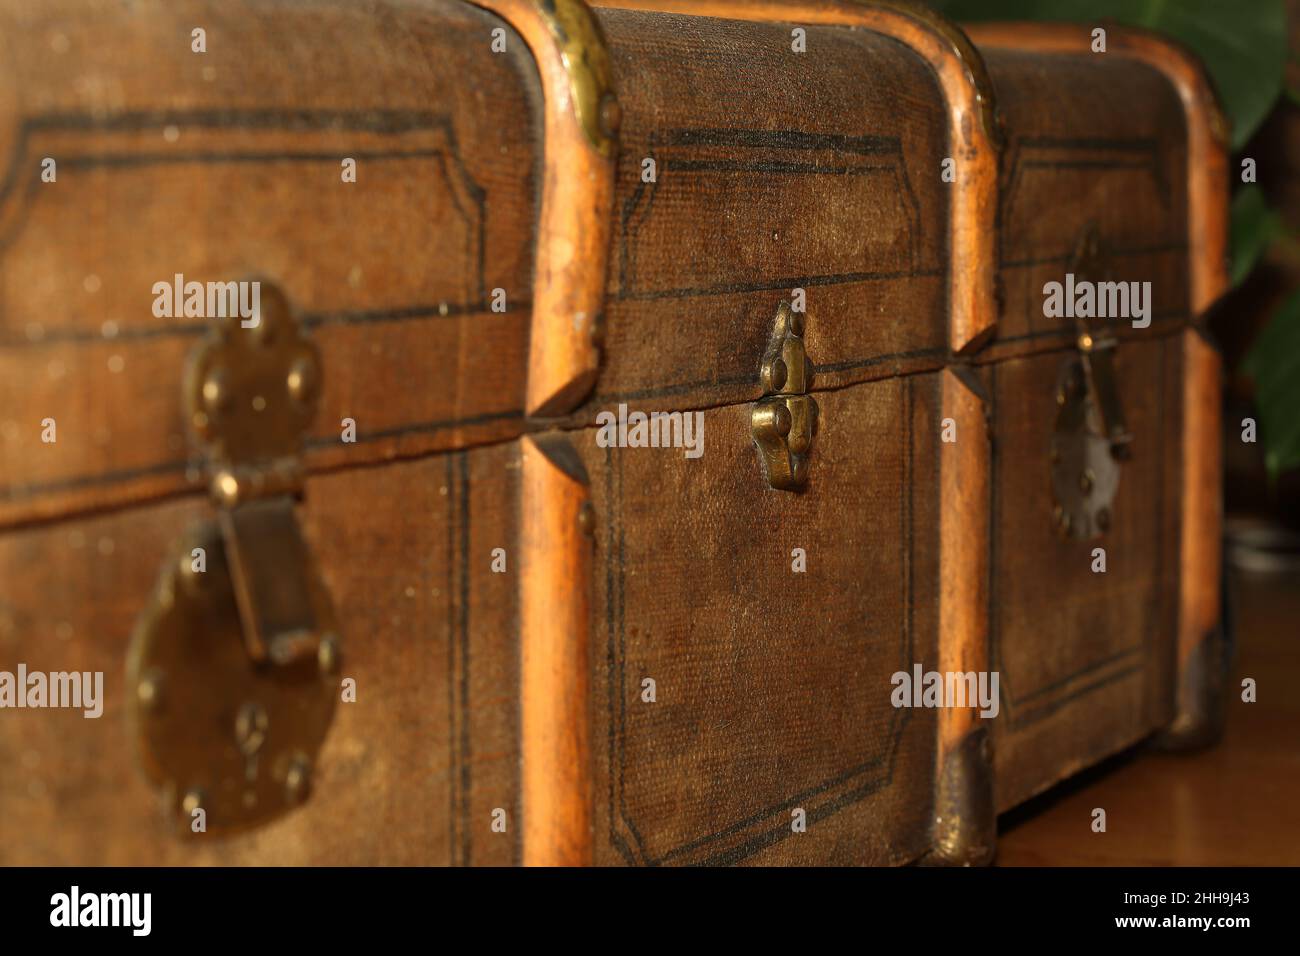 Old vintage colonial style coffer, chest, decorative details close up Stock Photo